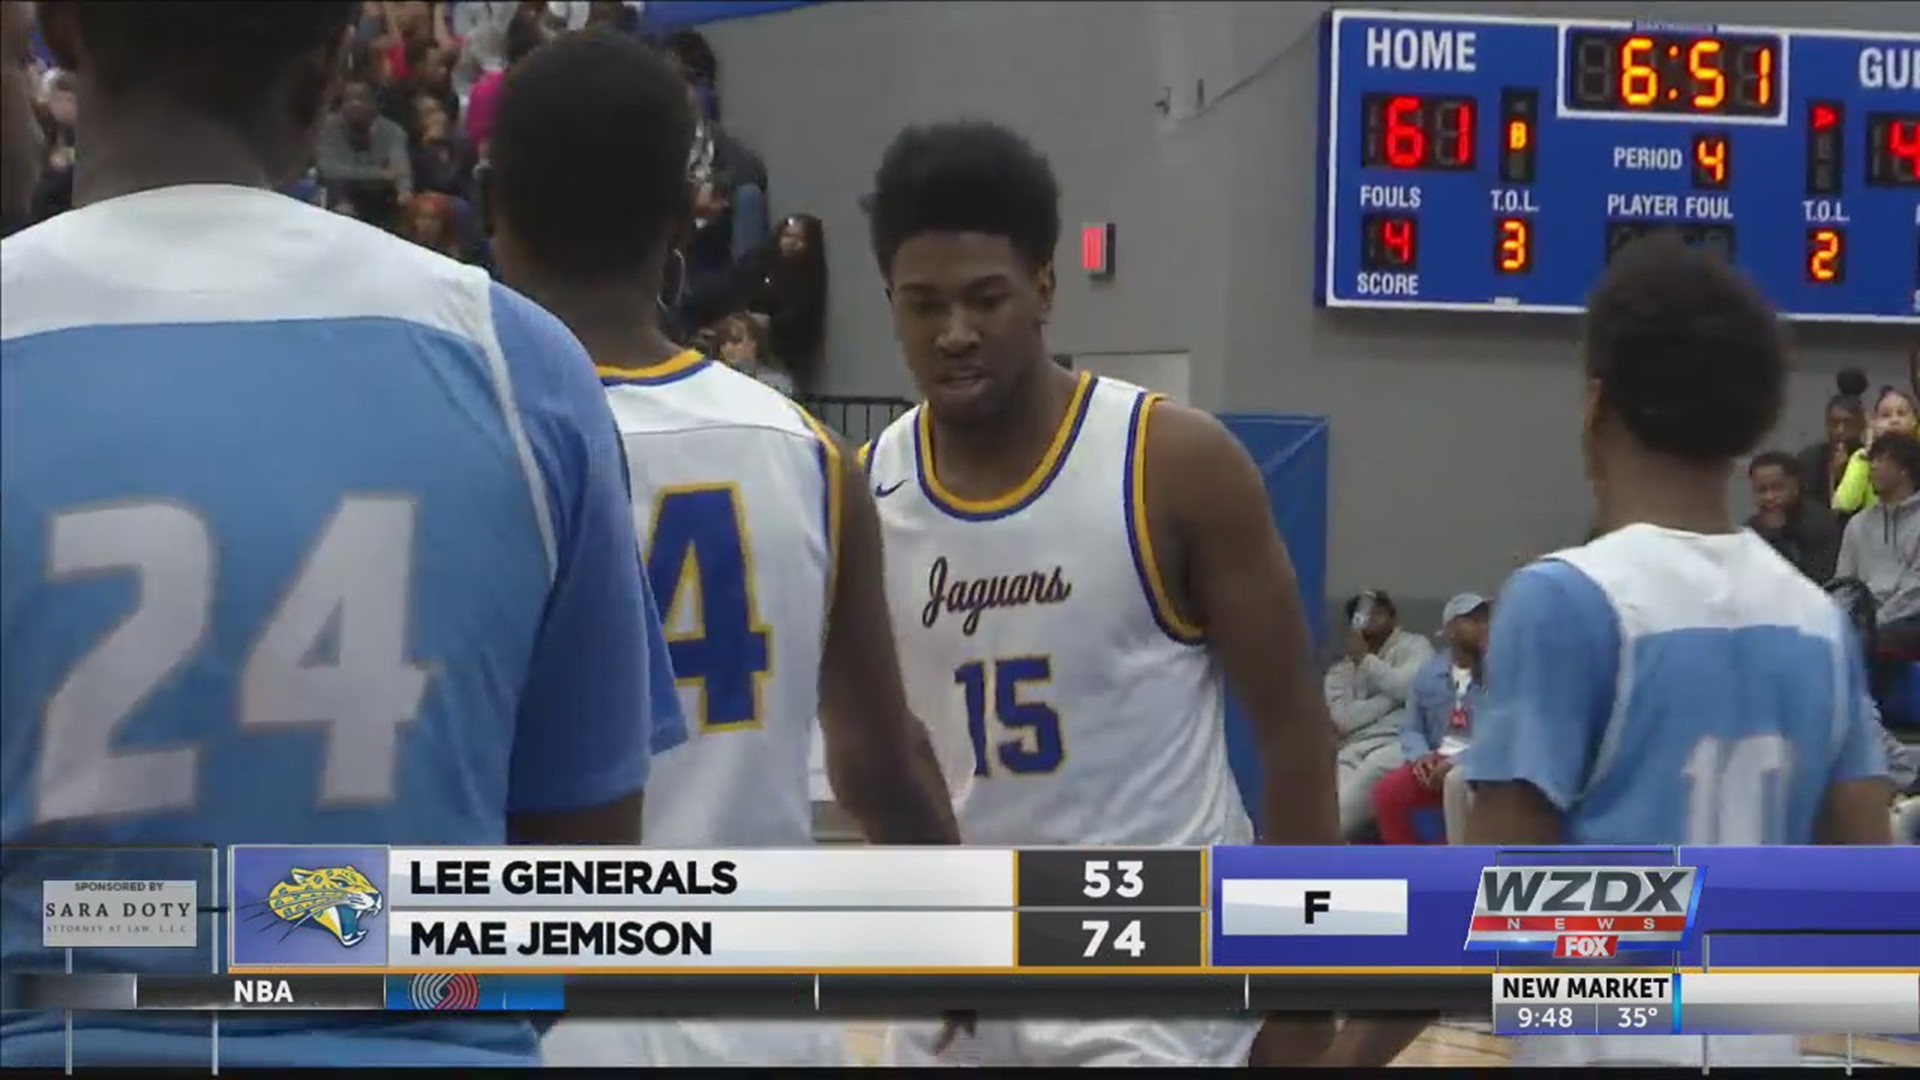 The Mae Jemison Jaguars won another area championship  by defeating cross city foe Lee, 74-53.